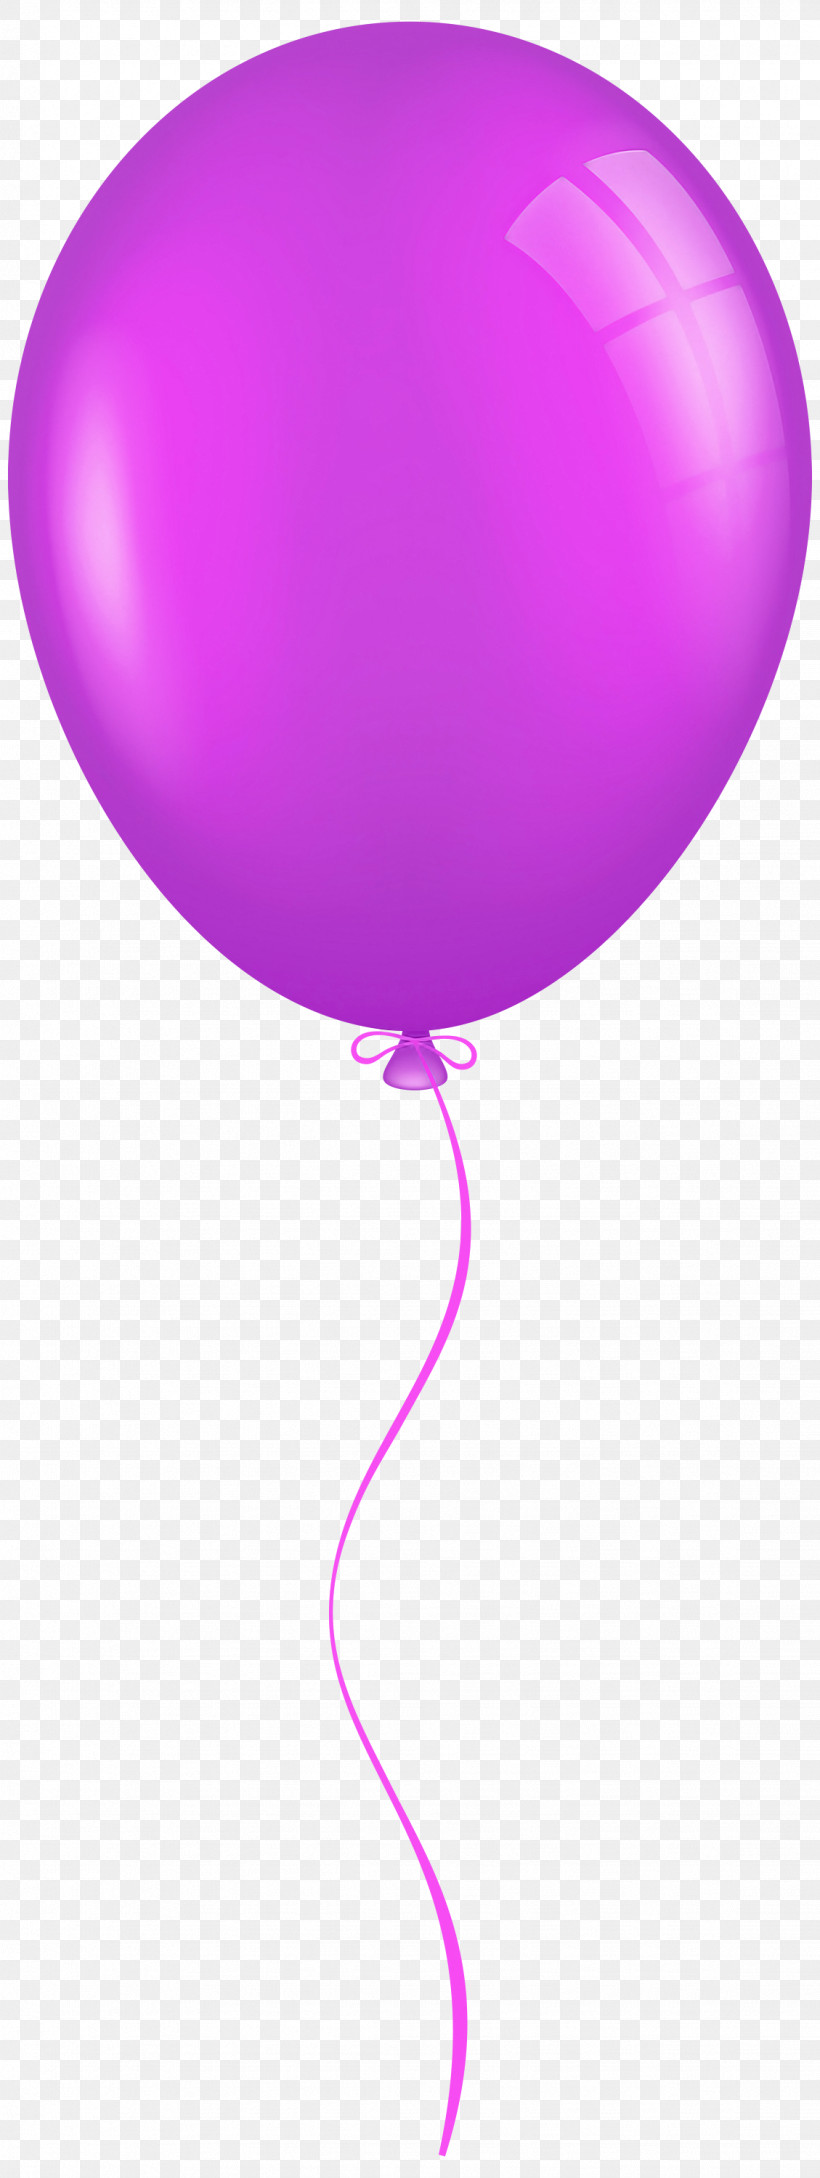 Balloon Pink Violet Purple Magenta, PNG, 1129x3000px, Balloon, Magenta, Material Property, Party Supply, Pink Download Free